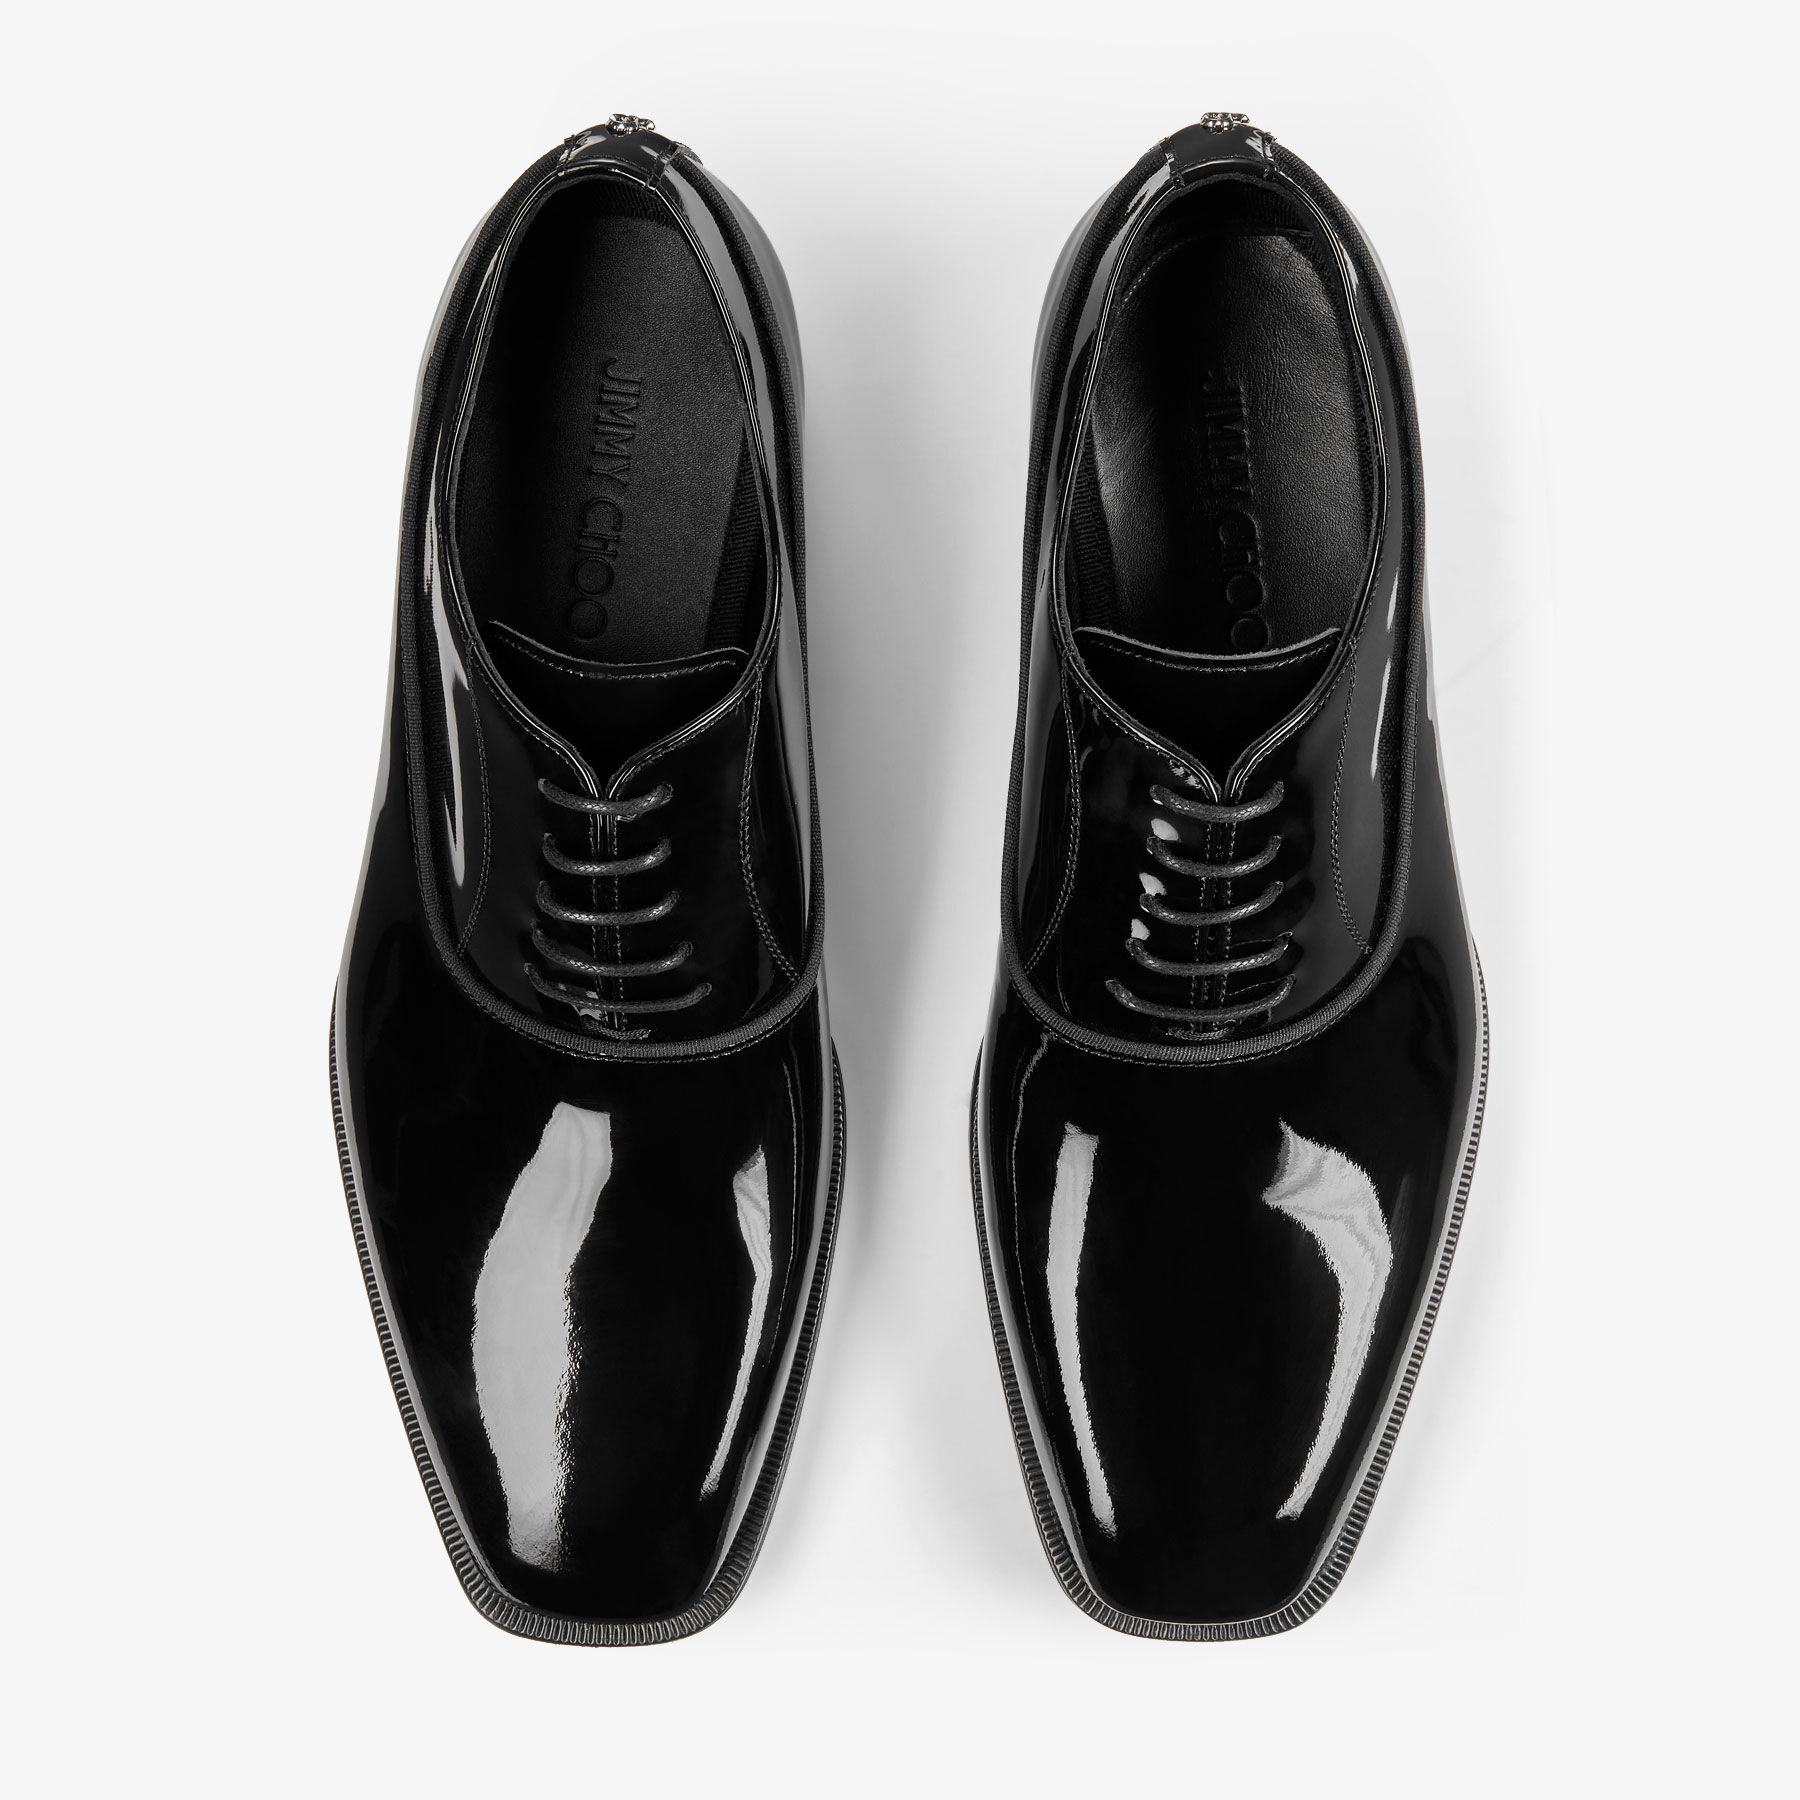 Foxley Oxford Shoe | Black Patent Leather Shoes | New Collection ...